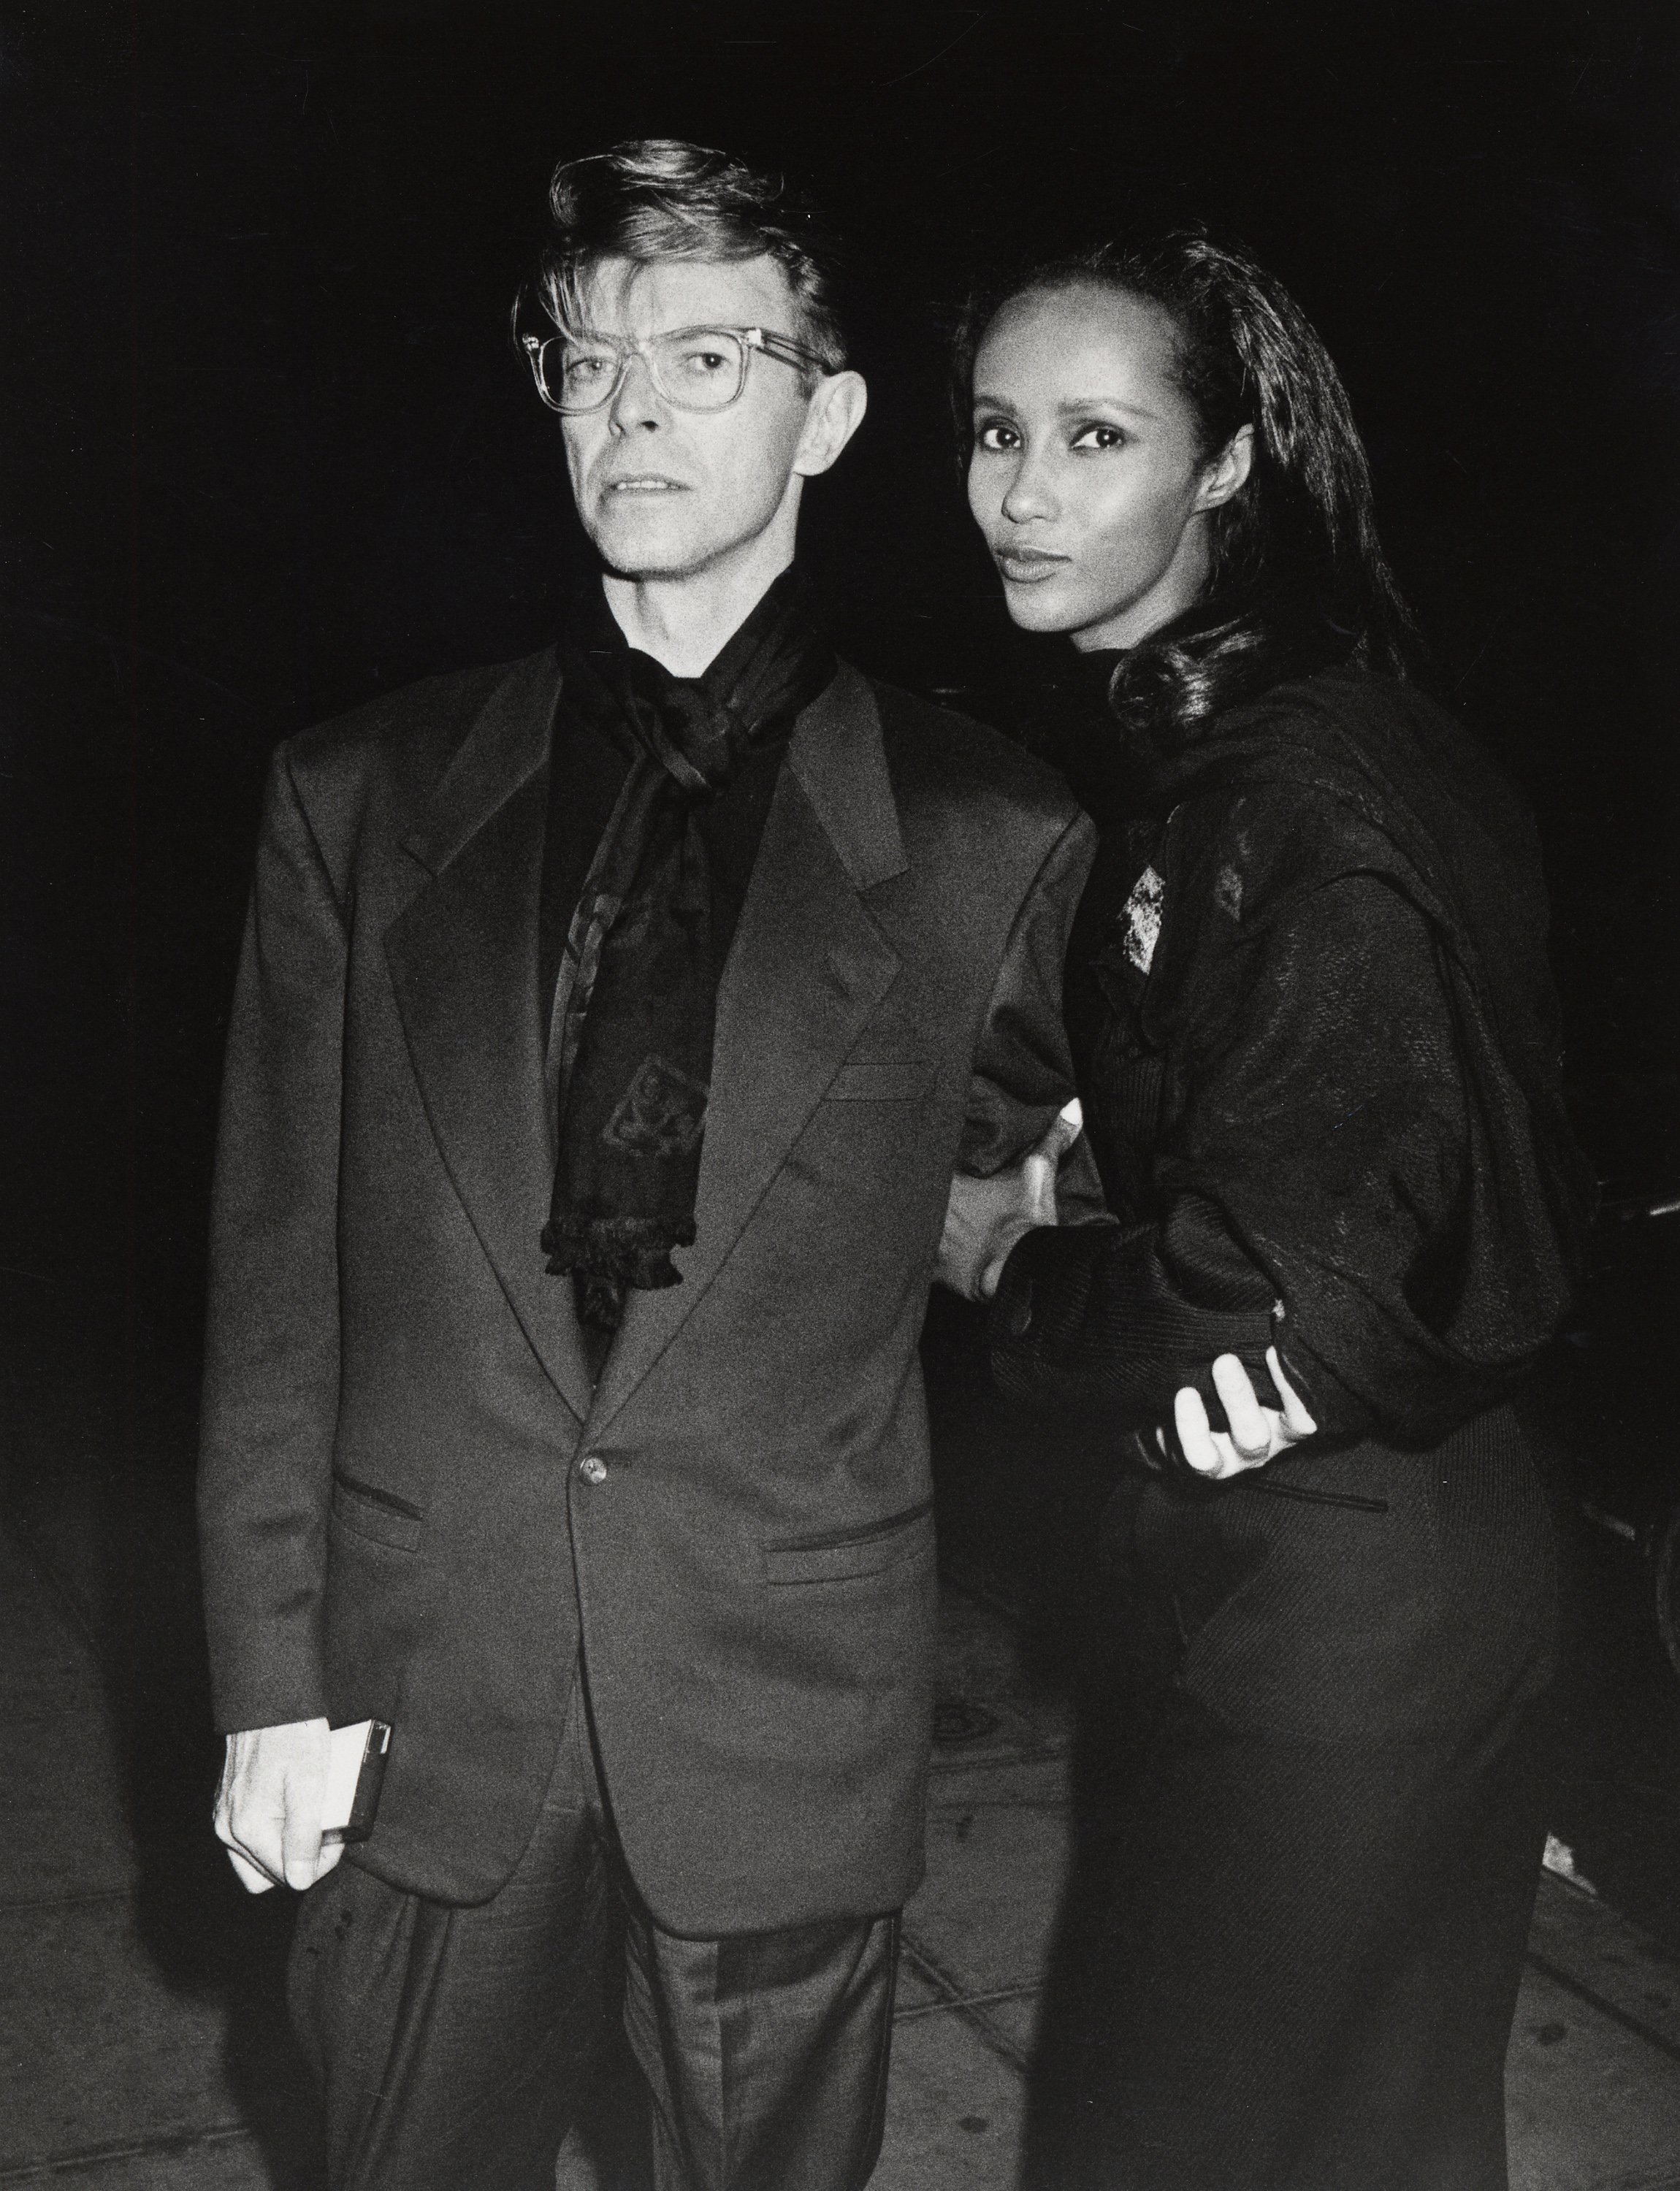 David Bowie with his wife Iman at the Eduard Nakhamkin Fine Arts Gallery Benefiting The American Cancer Society event on November 27, 1990 | Source: Getty Images